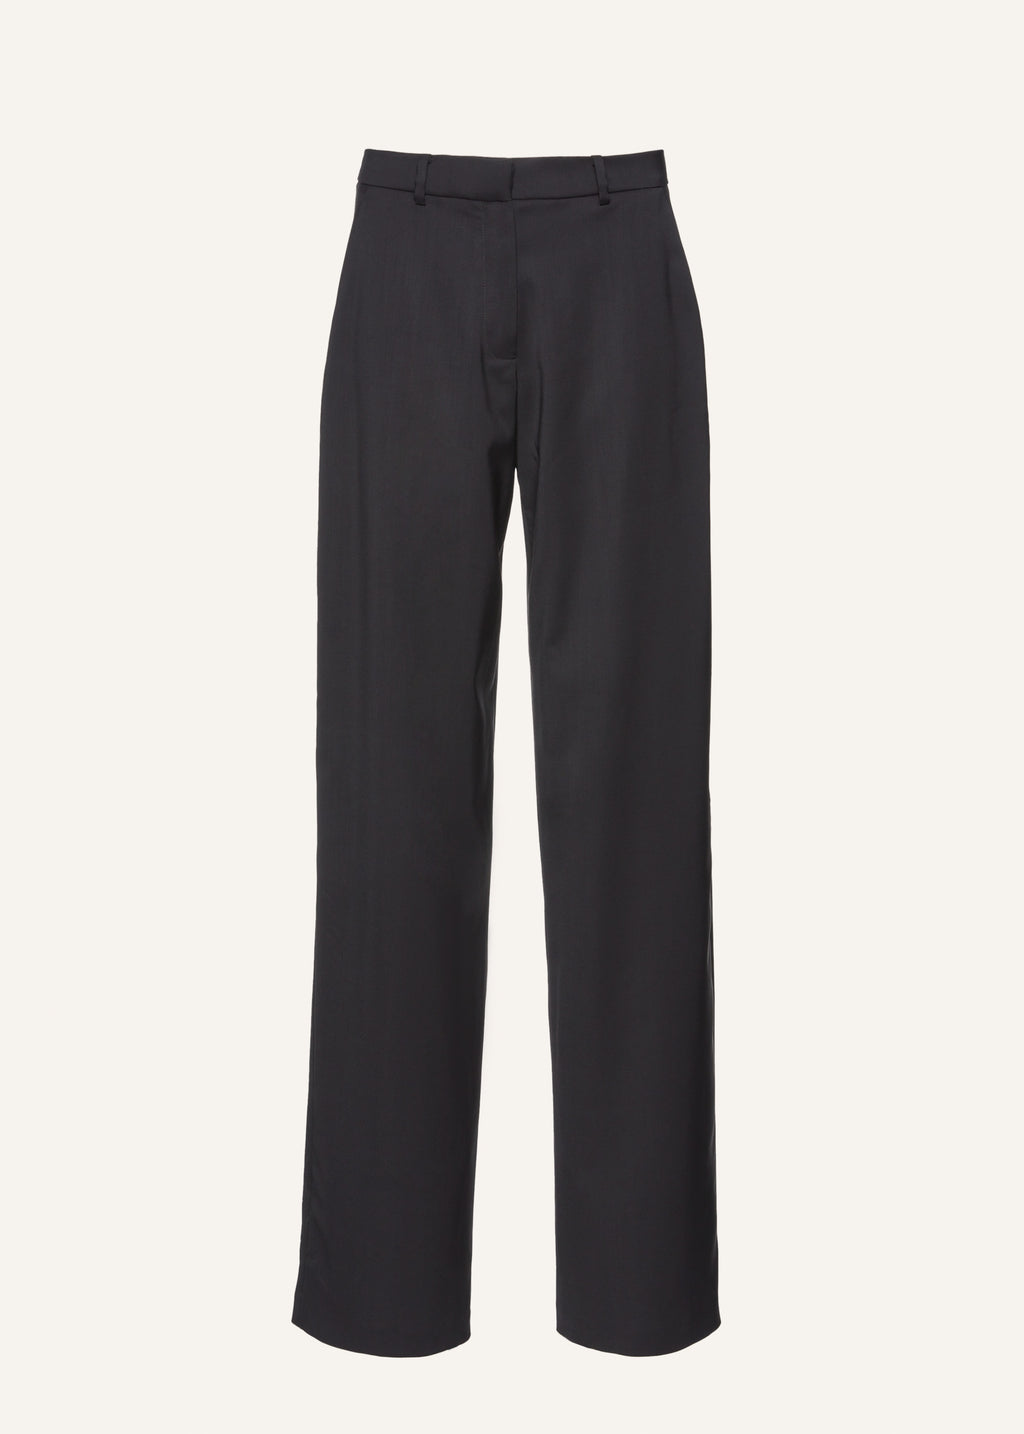 Tailored Black Trousers